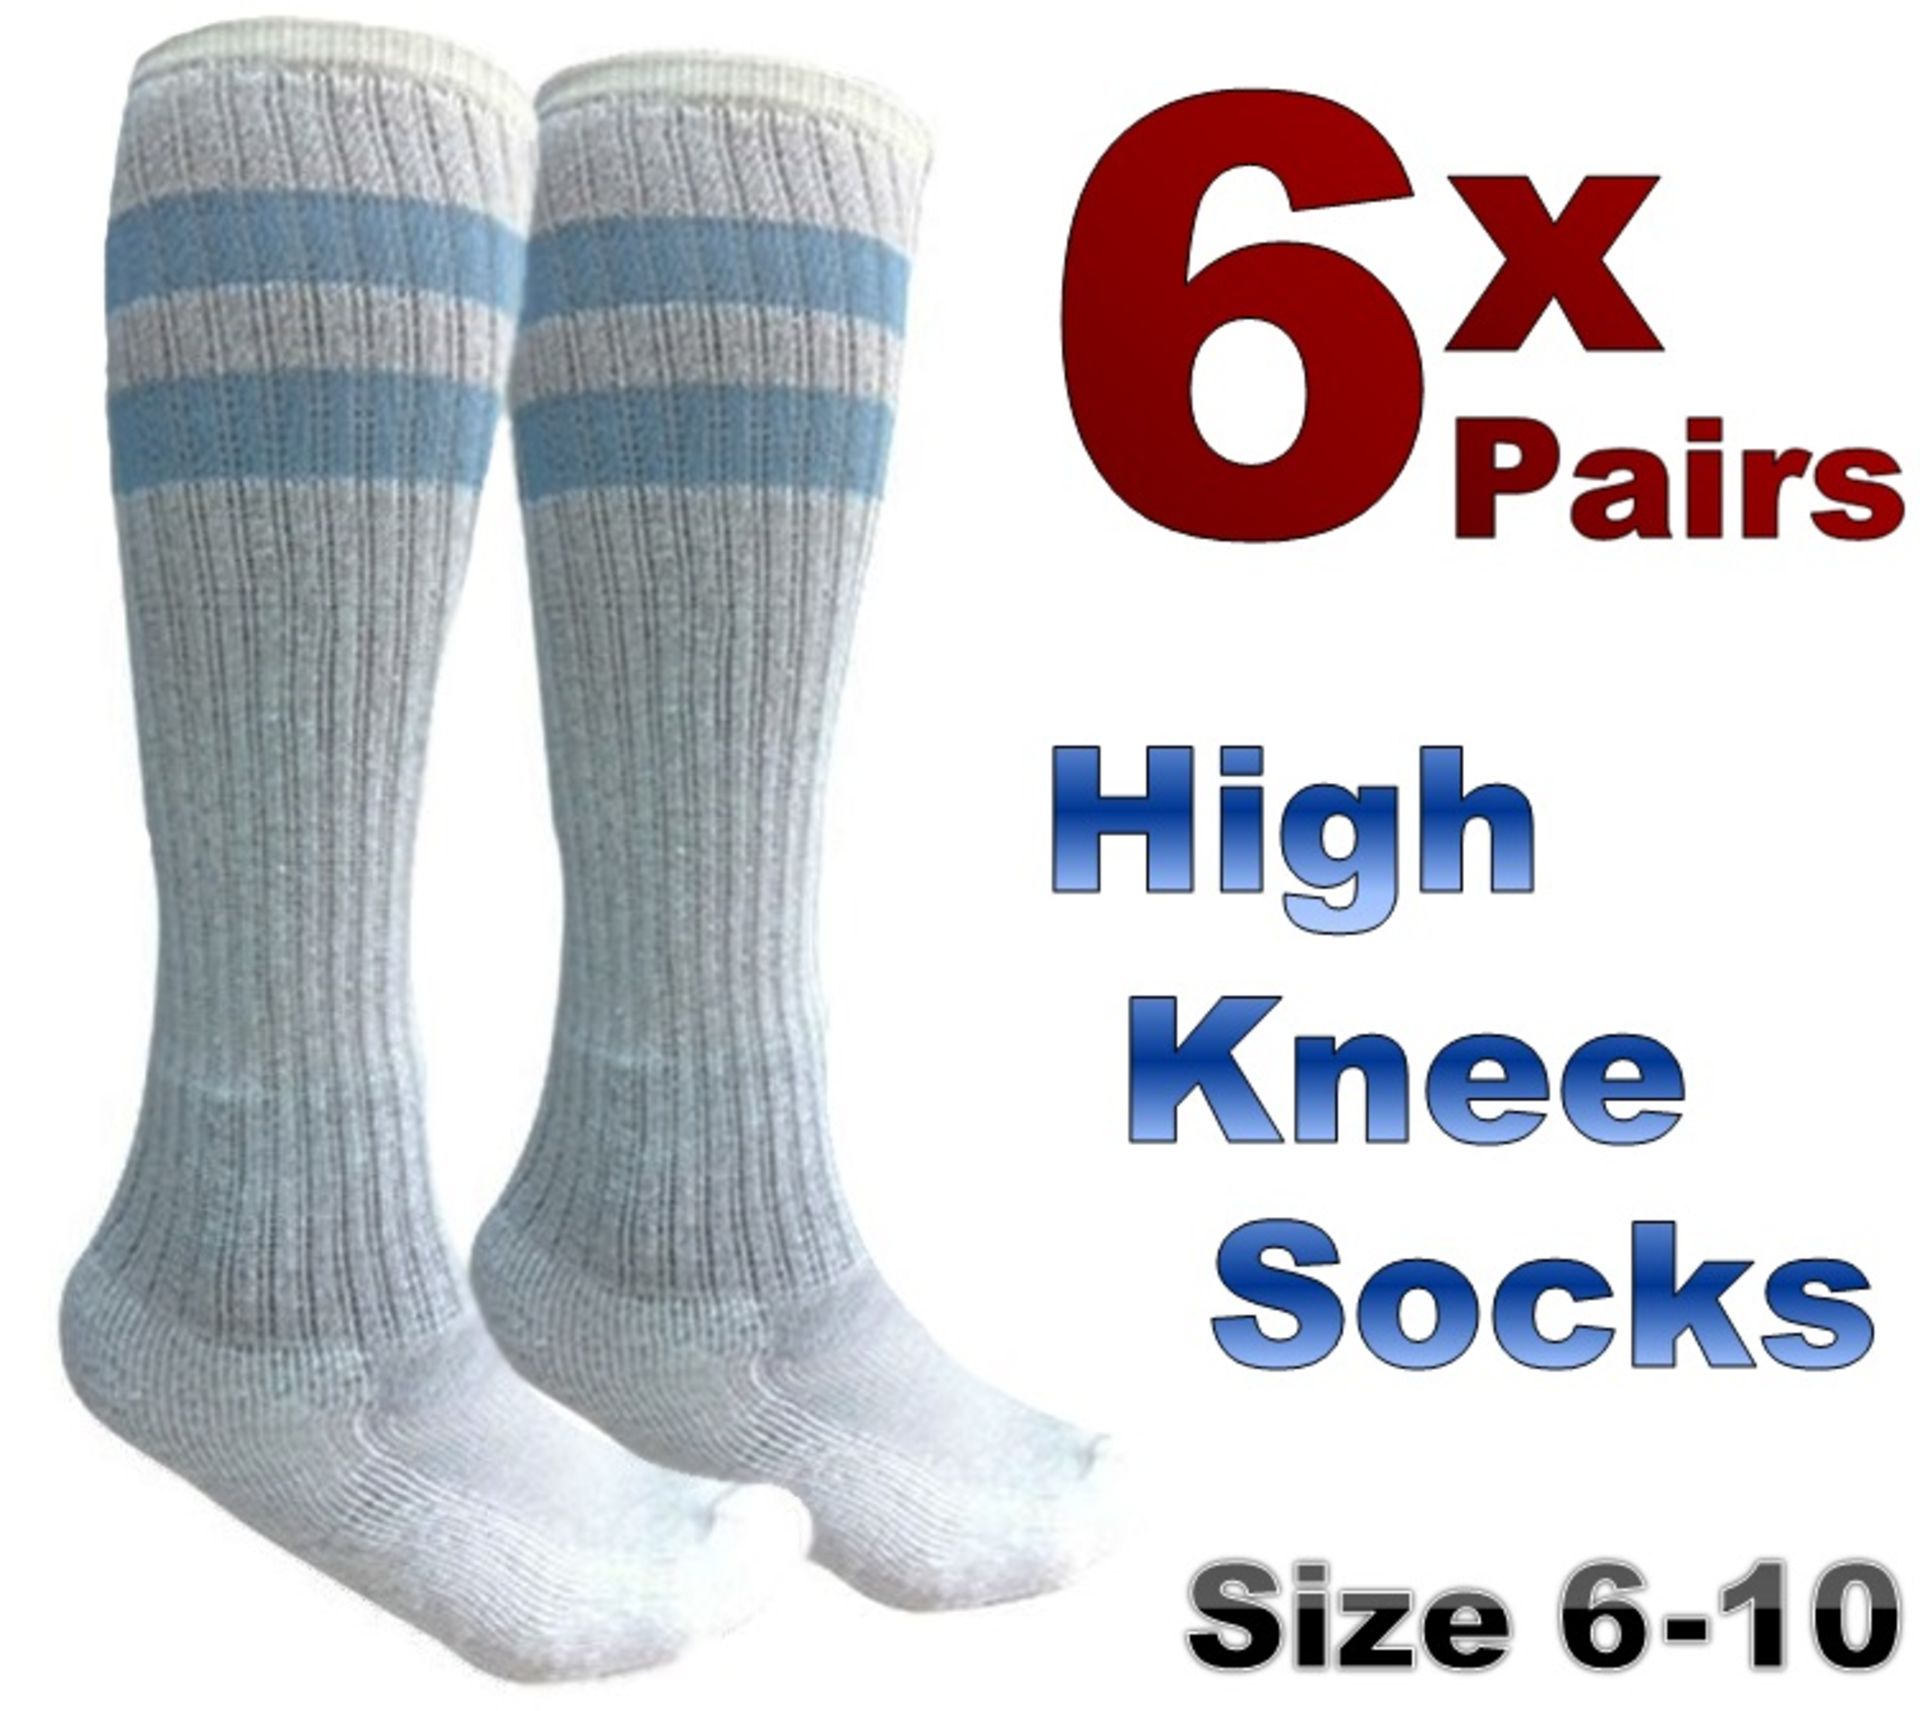 6x pairs High Knee Long Green Stripe White Colour Socks - suitable for Football Soccer Rugby and